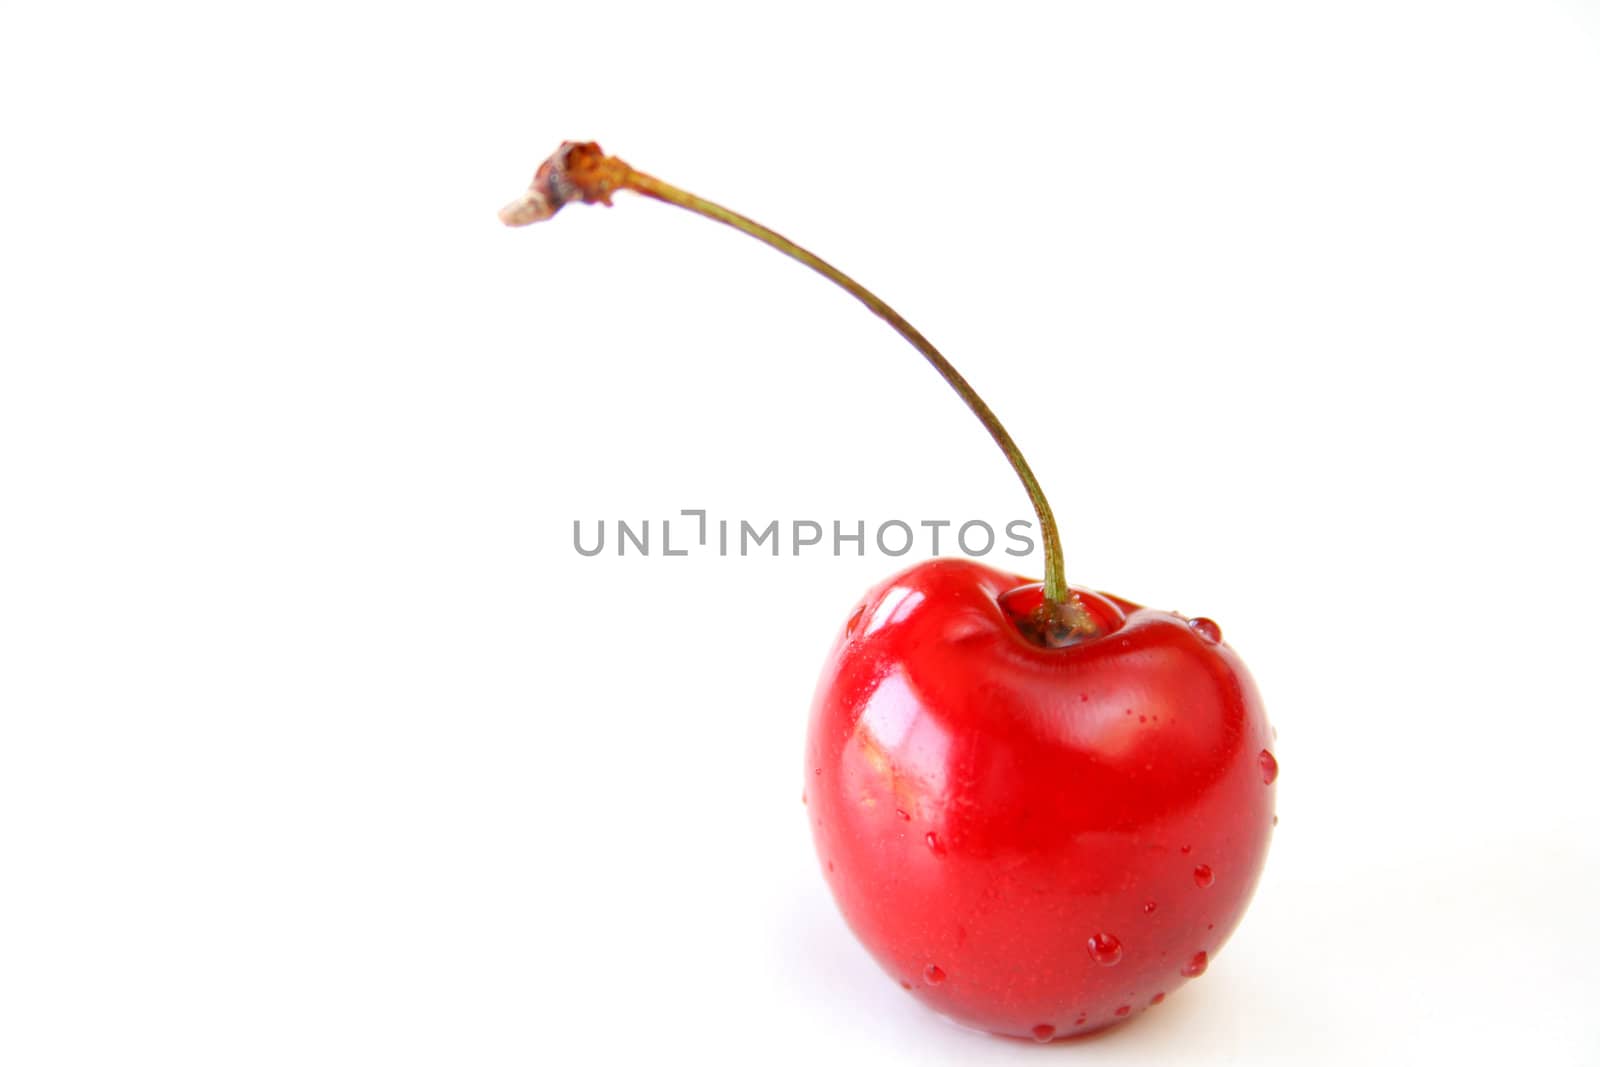 close up of a wet single cherry isolated on a white background.